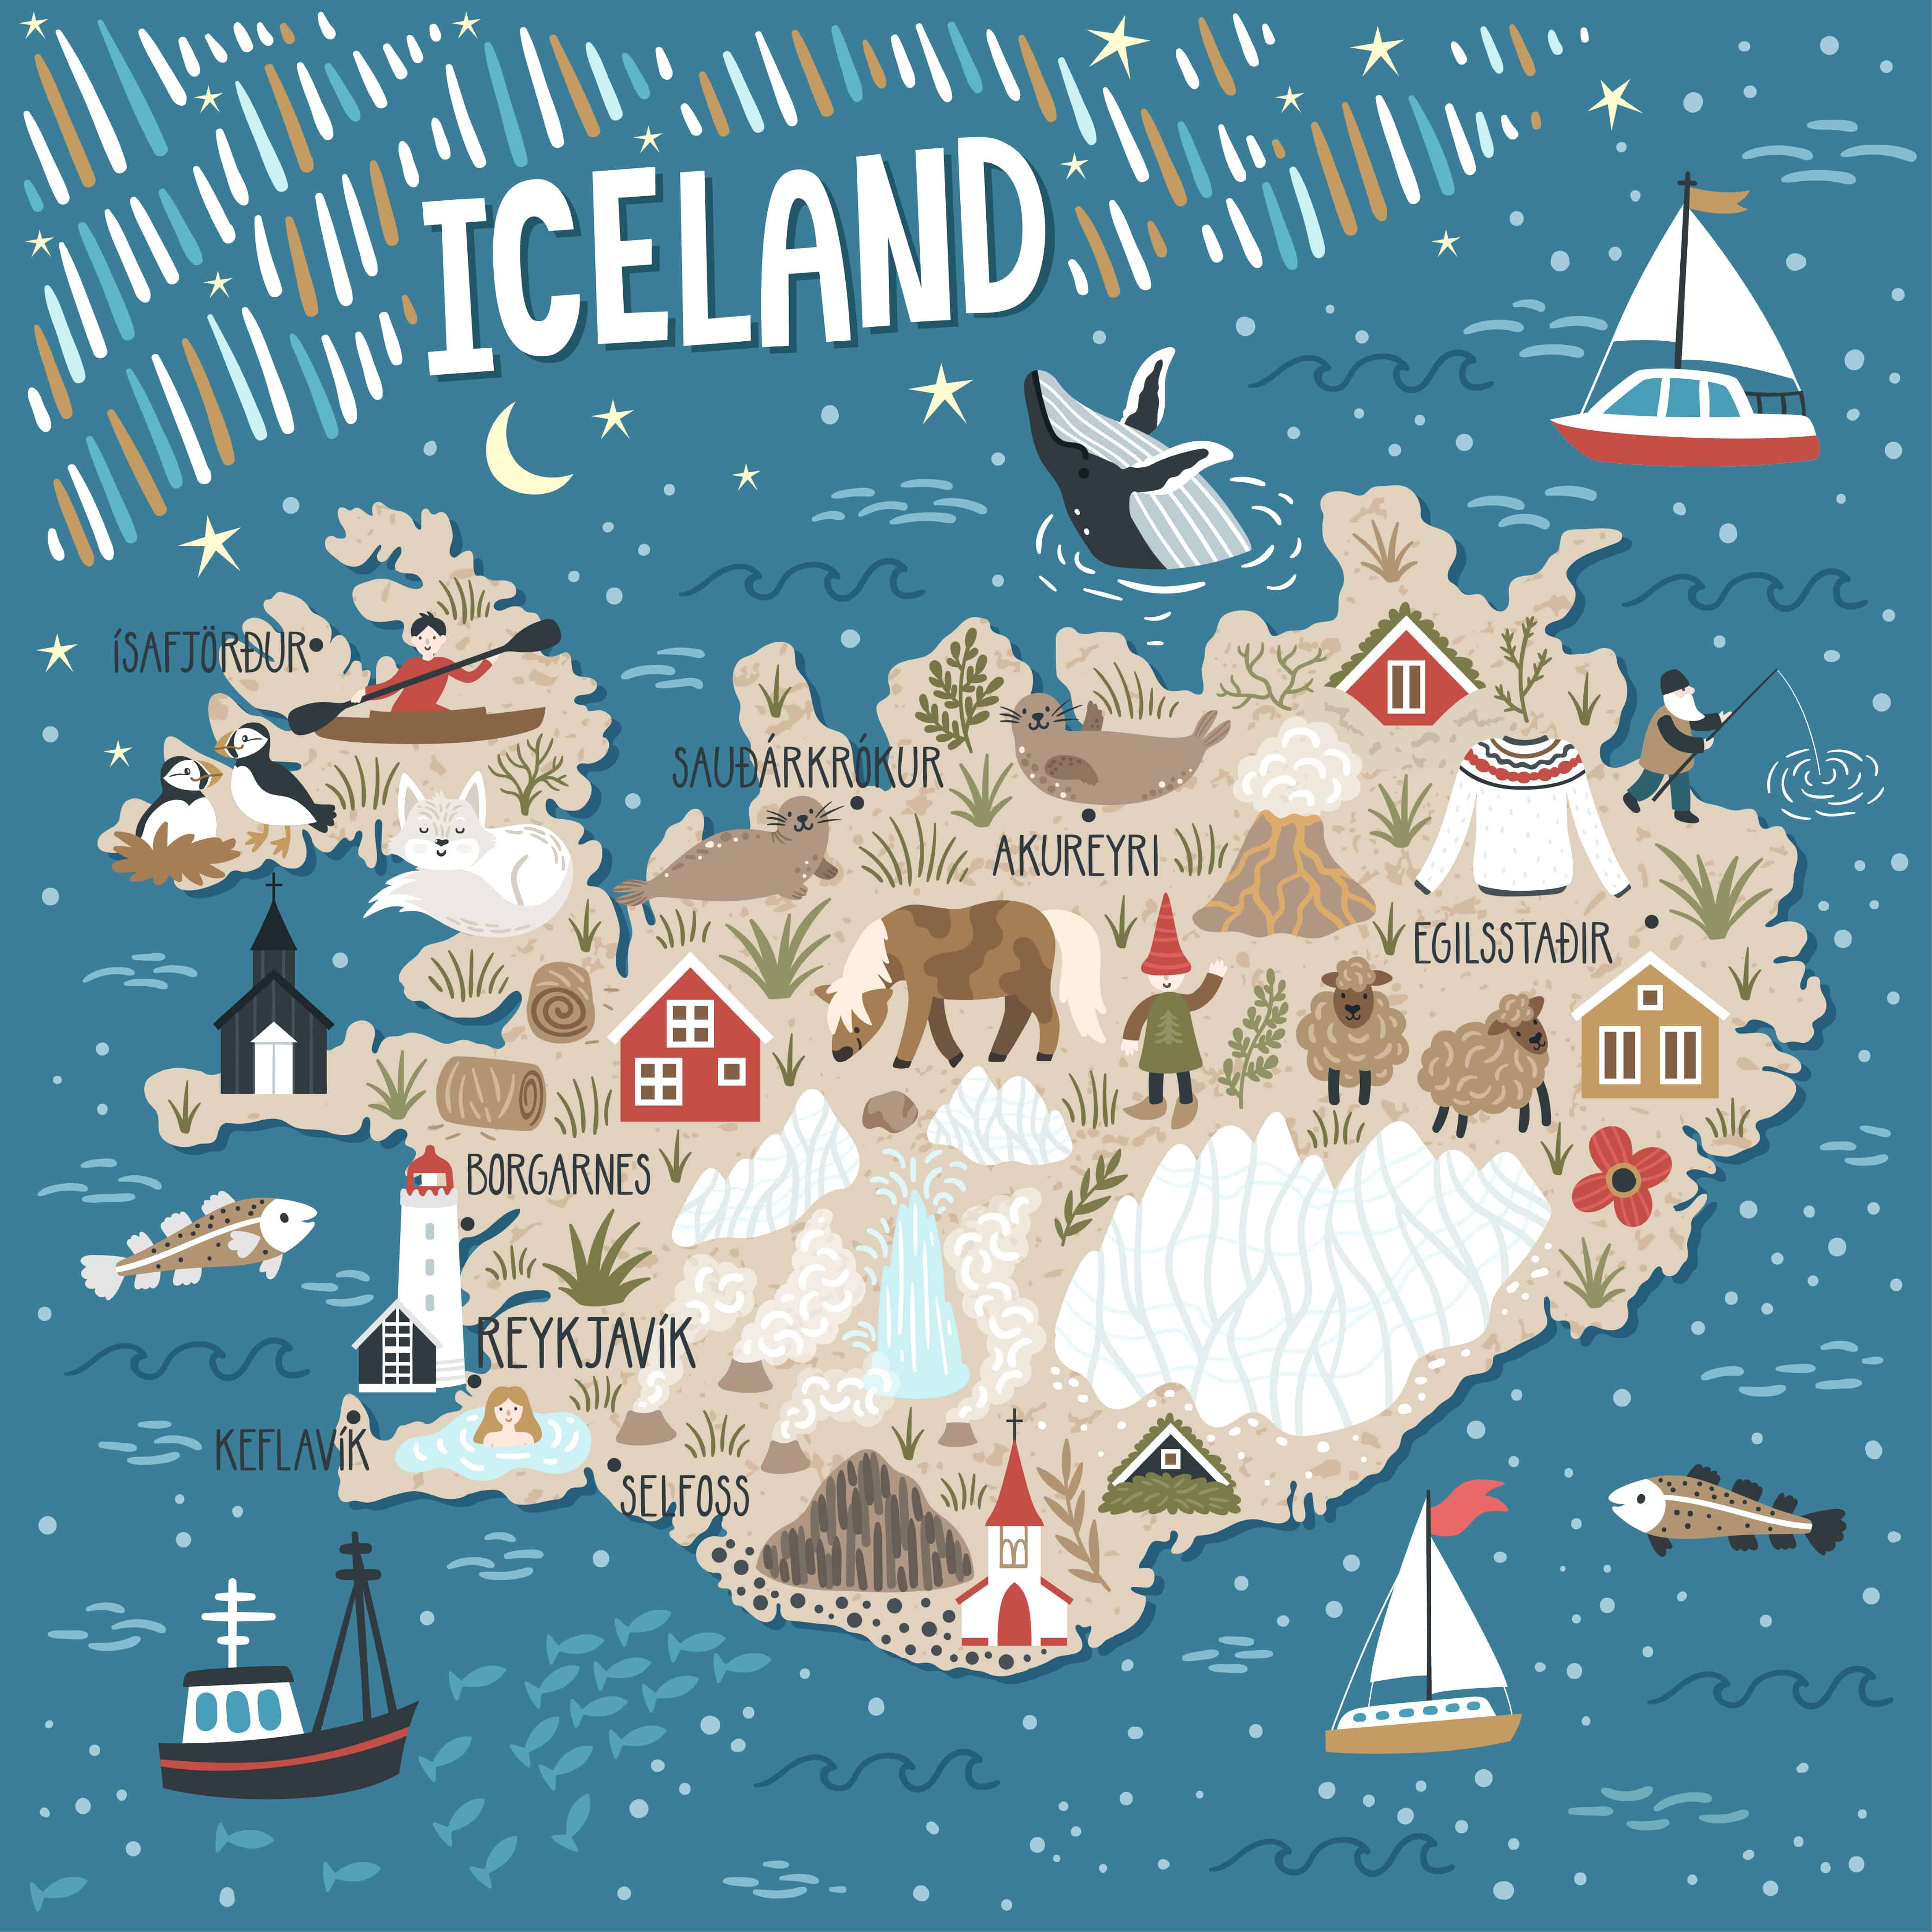 road trip iceland itinerary